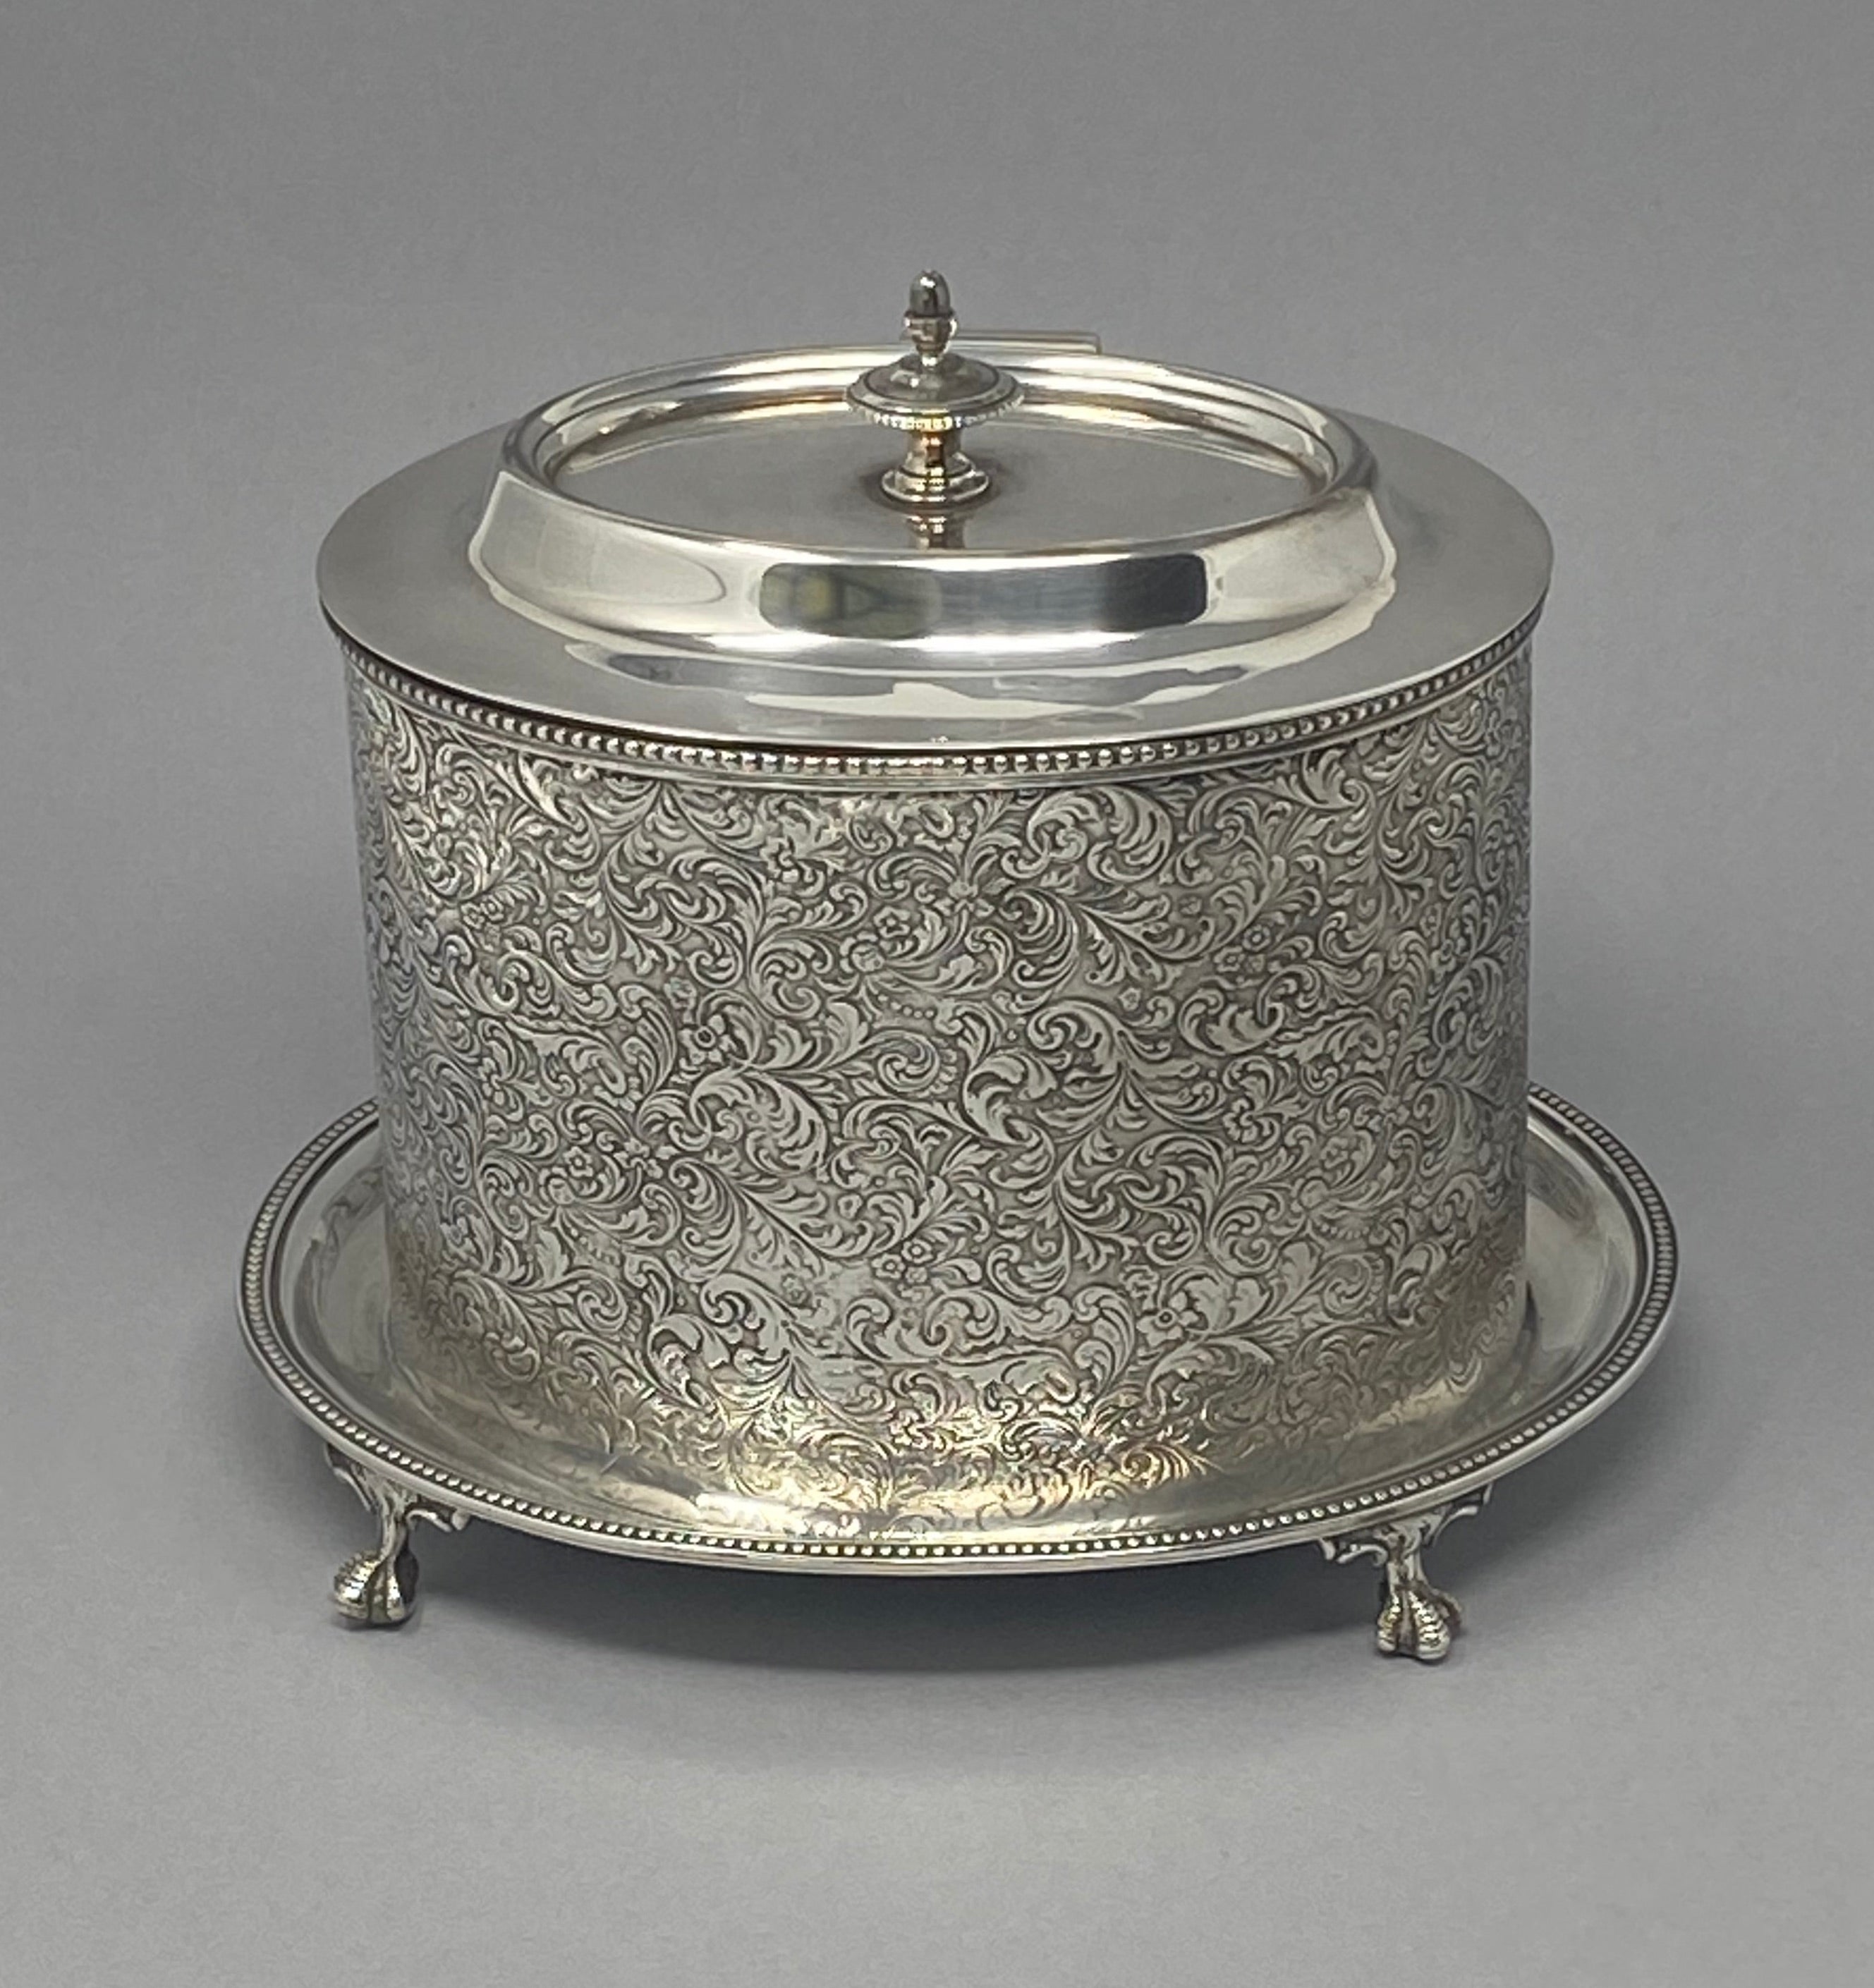 Antique Silver Plated Oval Biscuit Box